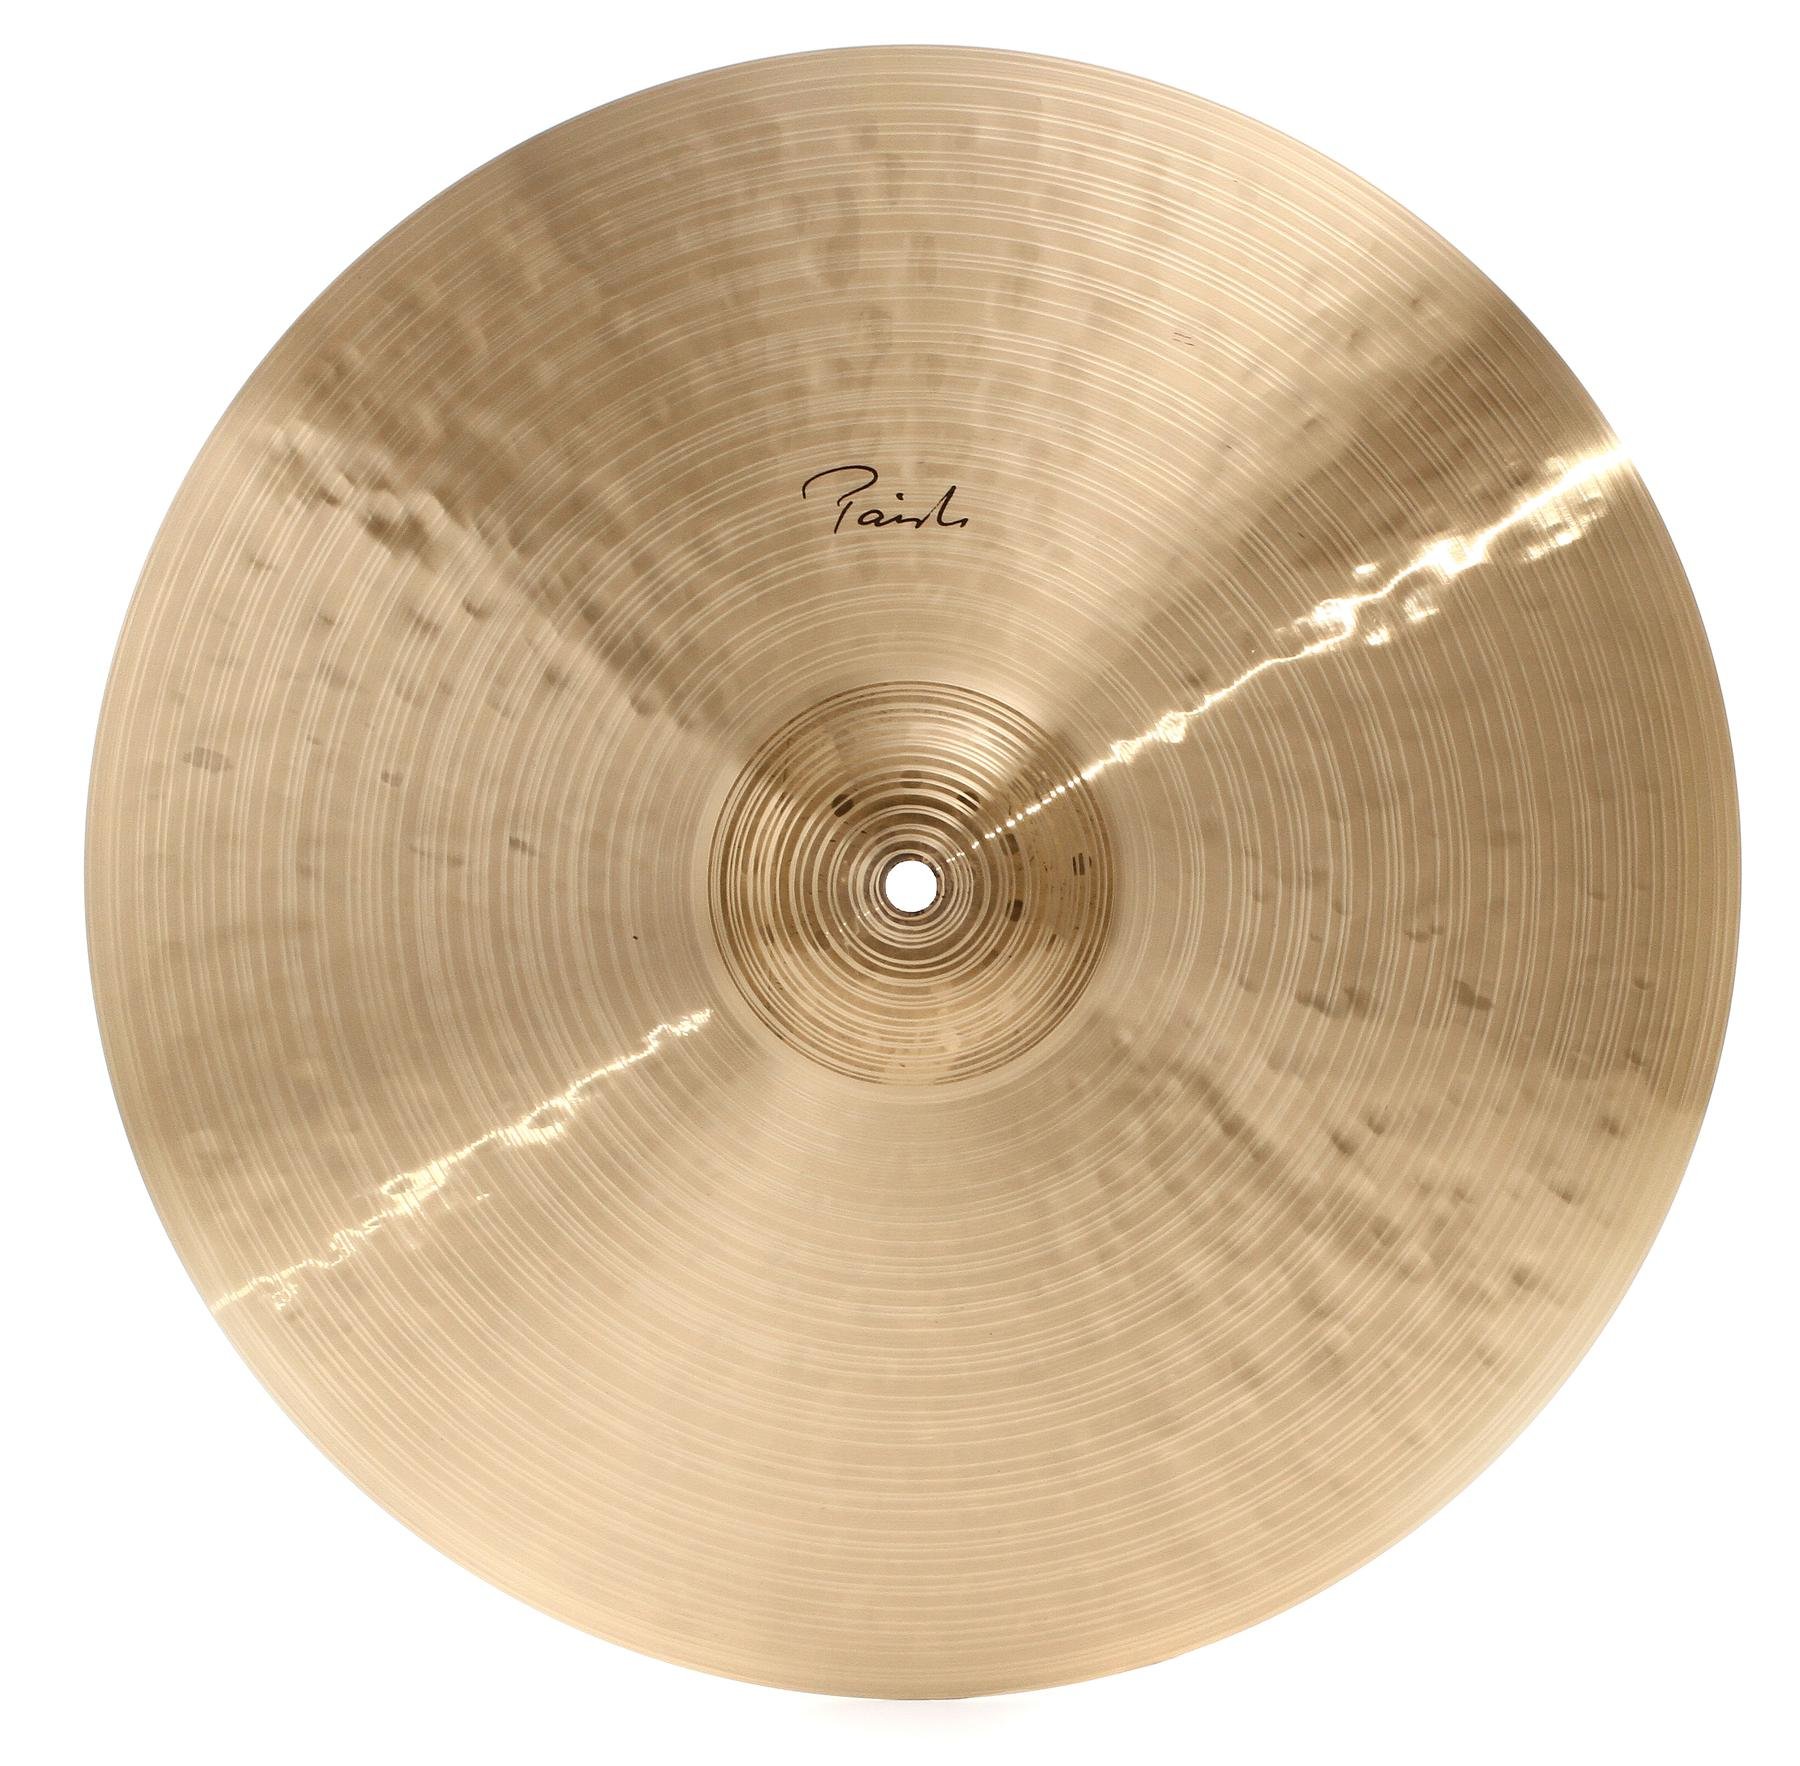 Paiste 17 inch Signature Traditionals Thin Crash Cymbal | Sweetwater